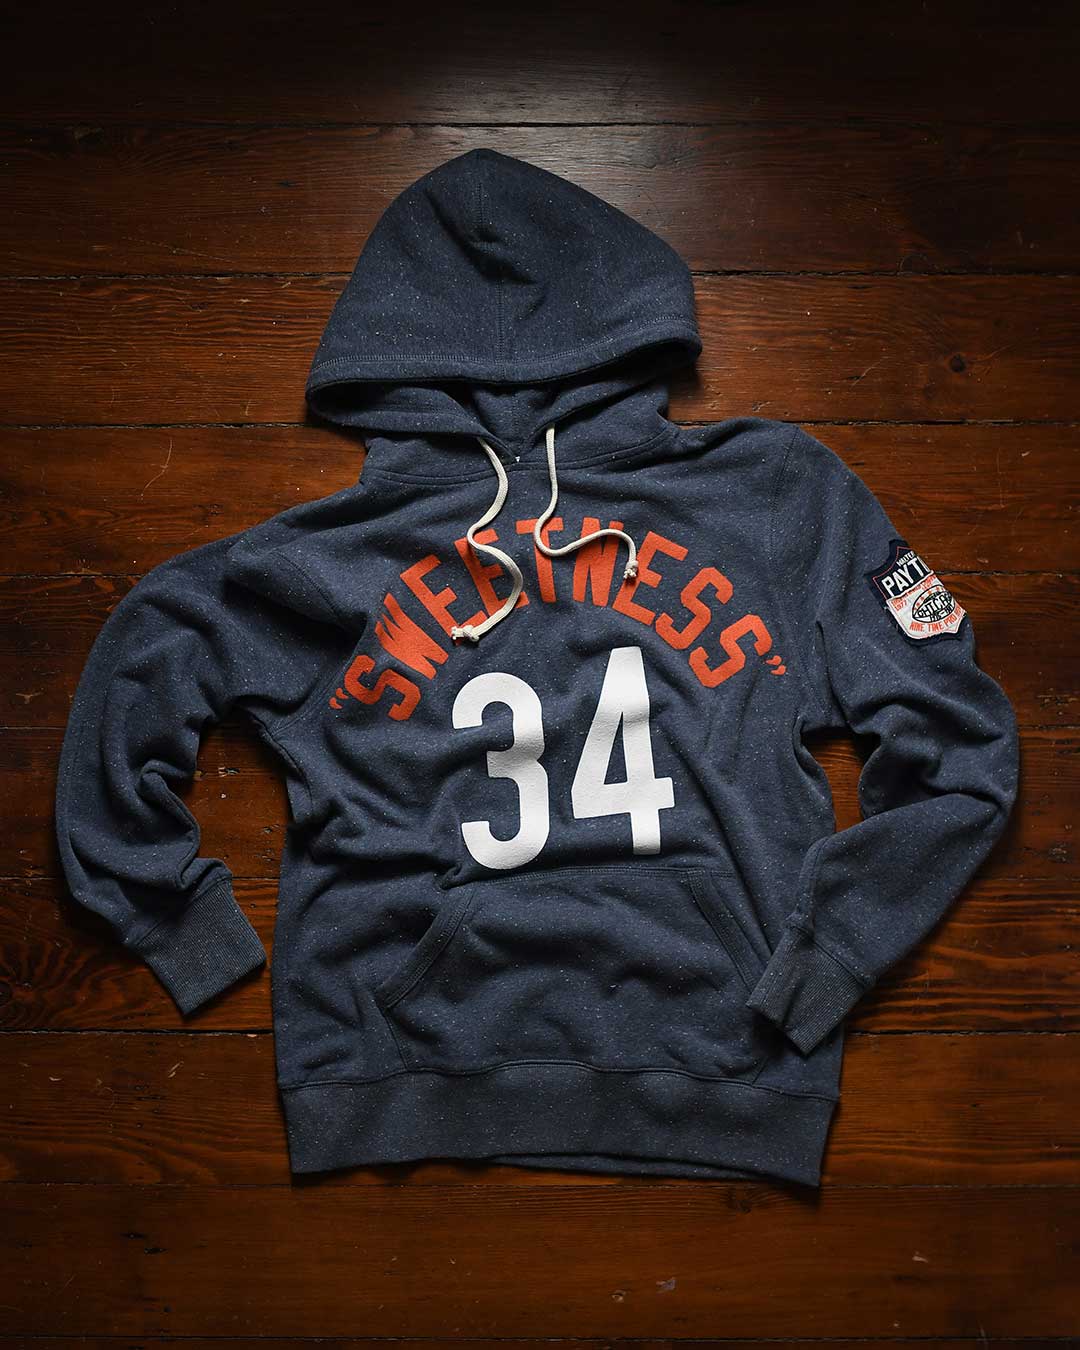 Payton Sweetness #34 Navy PO Hoody - Roots of Fight